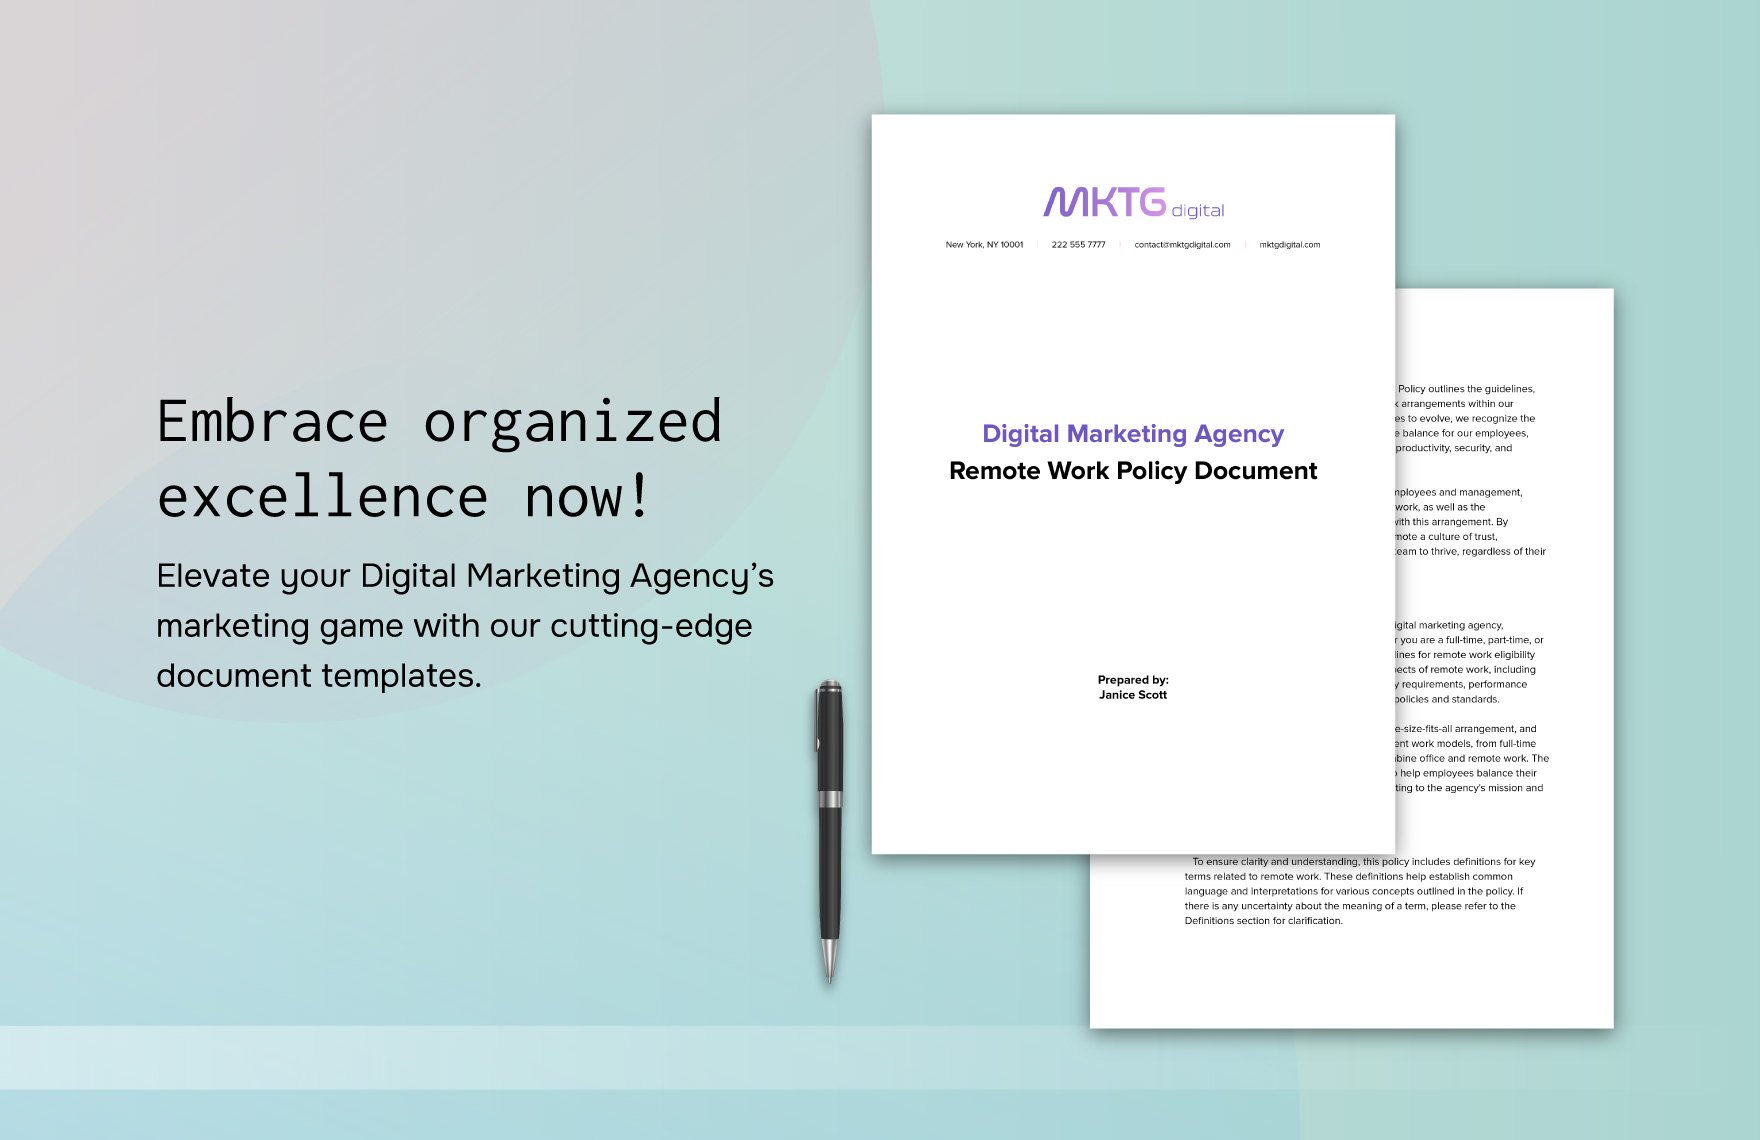 Digital Marketing Agency Remote Work Policy Document Template 